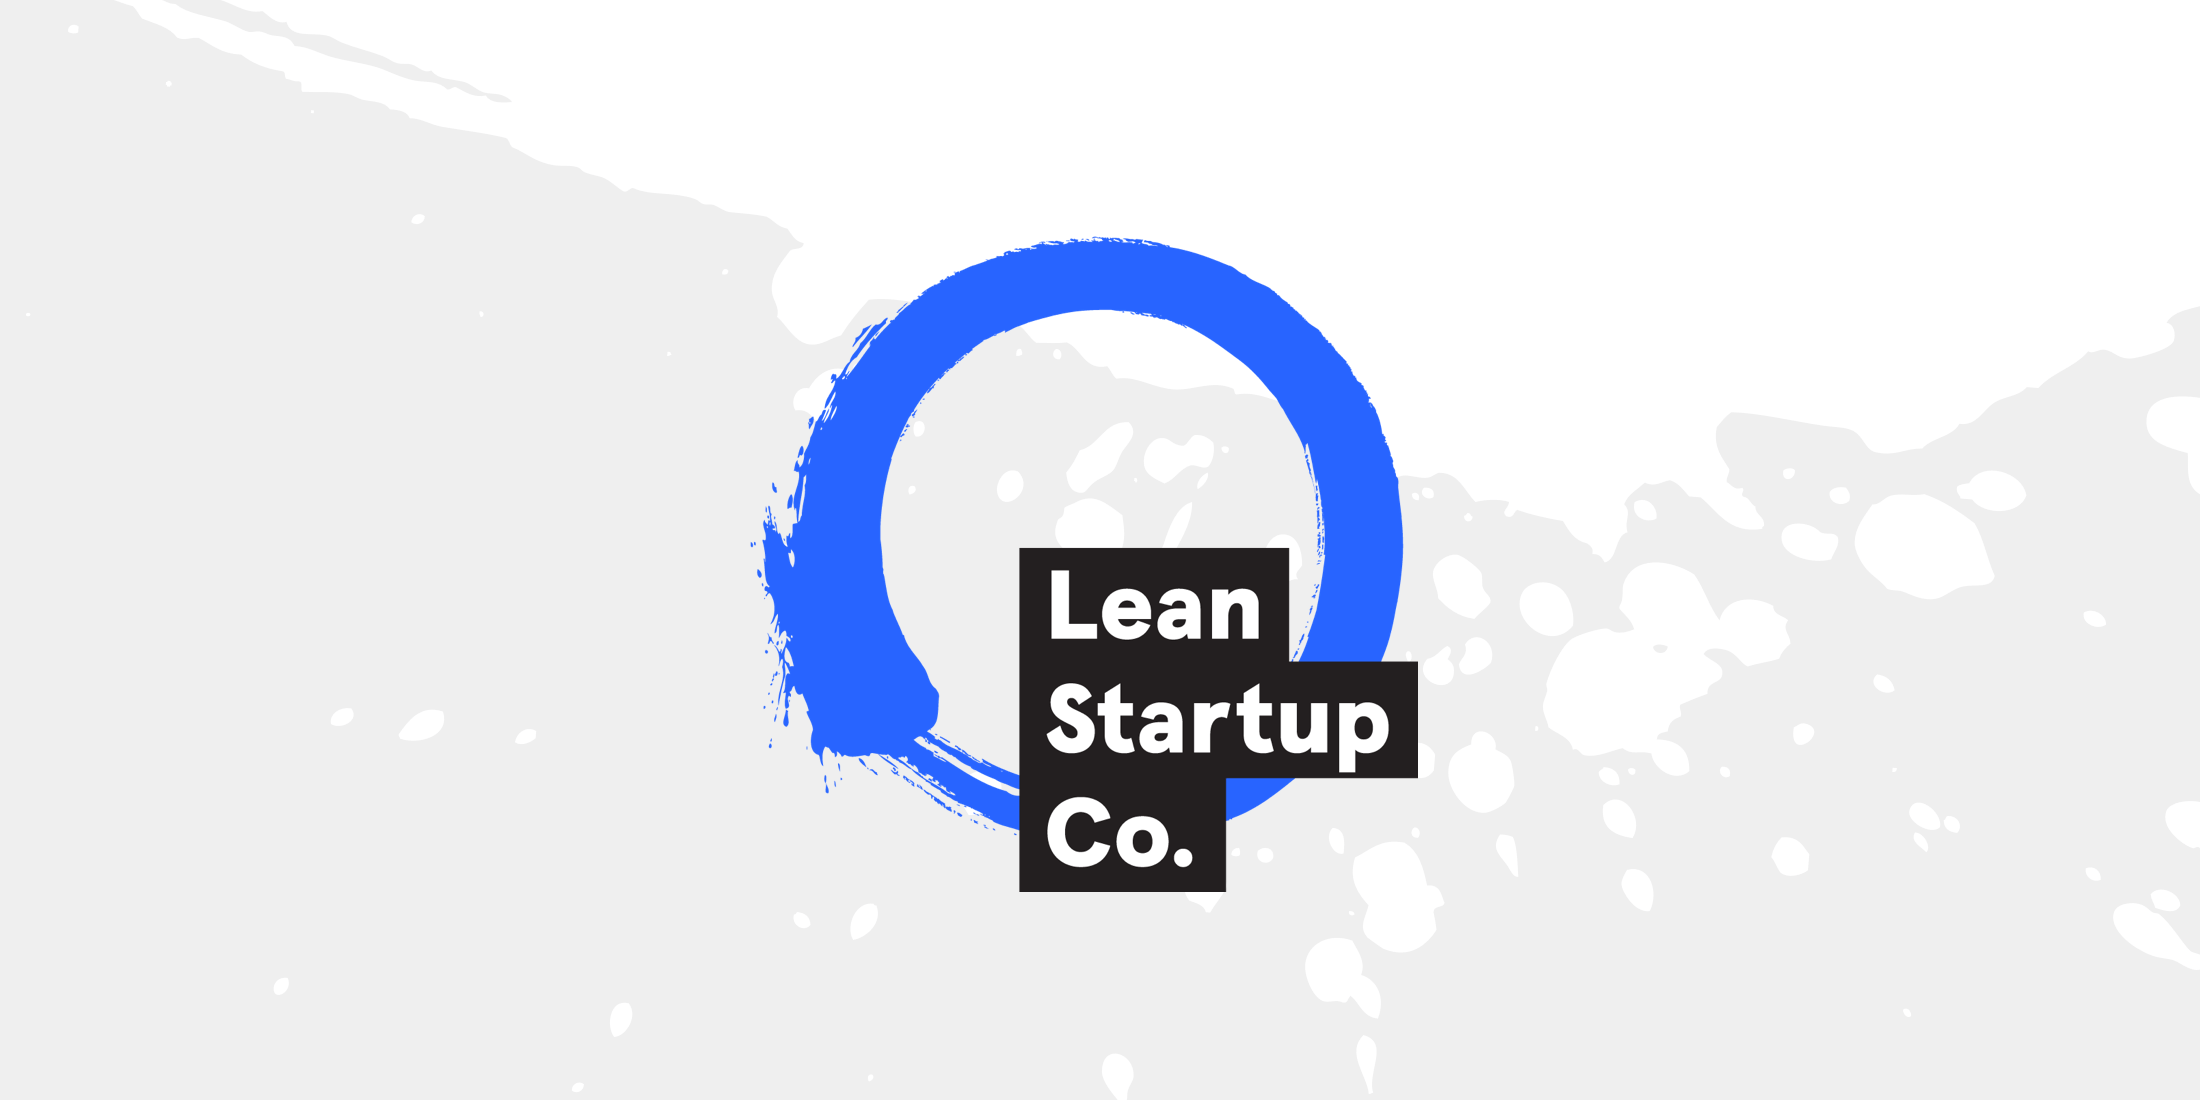 Lean Startup Co. logo, which is a blue enzo